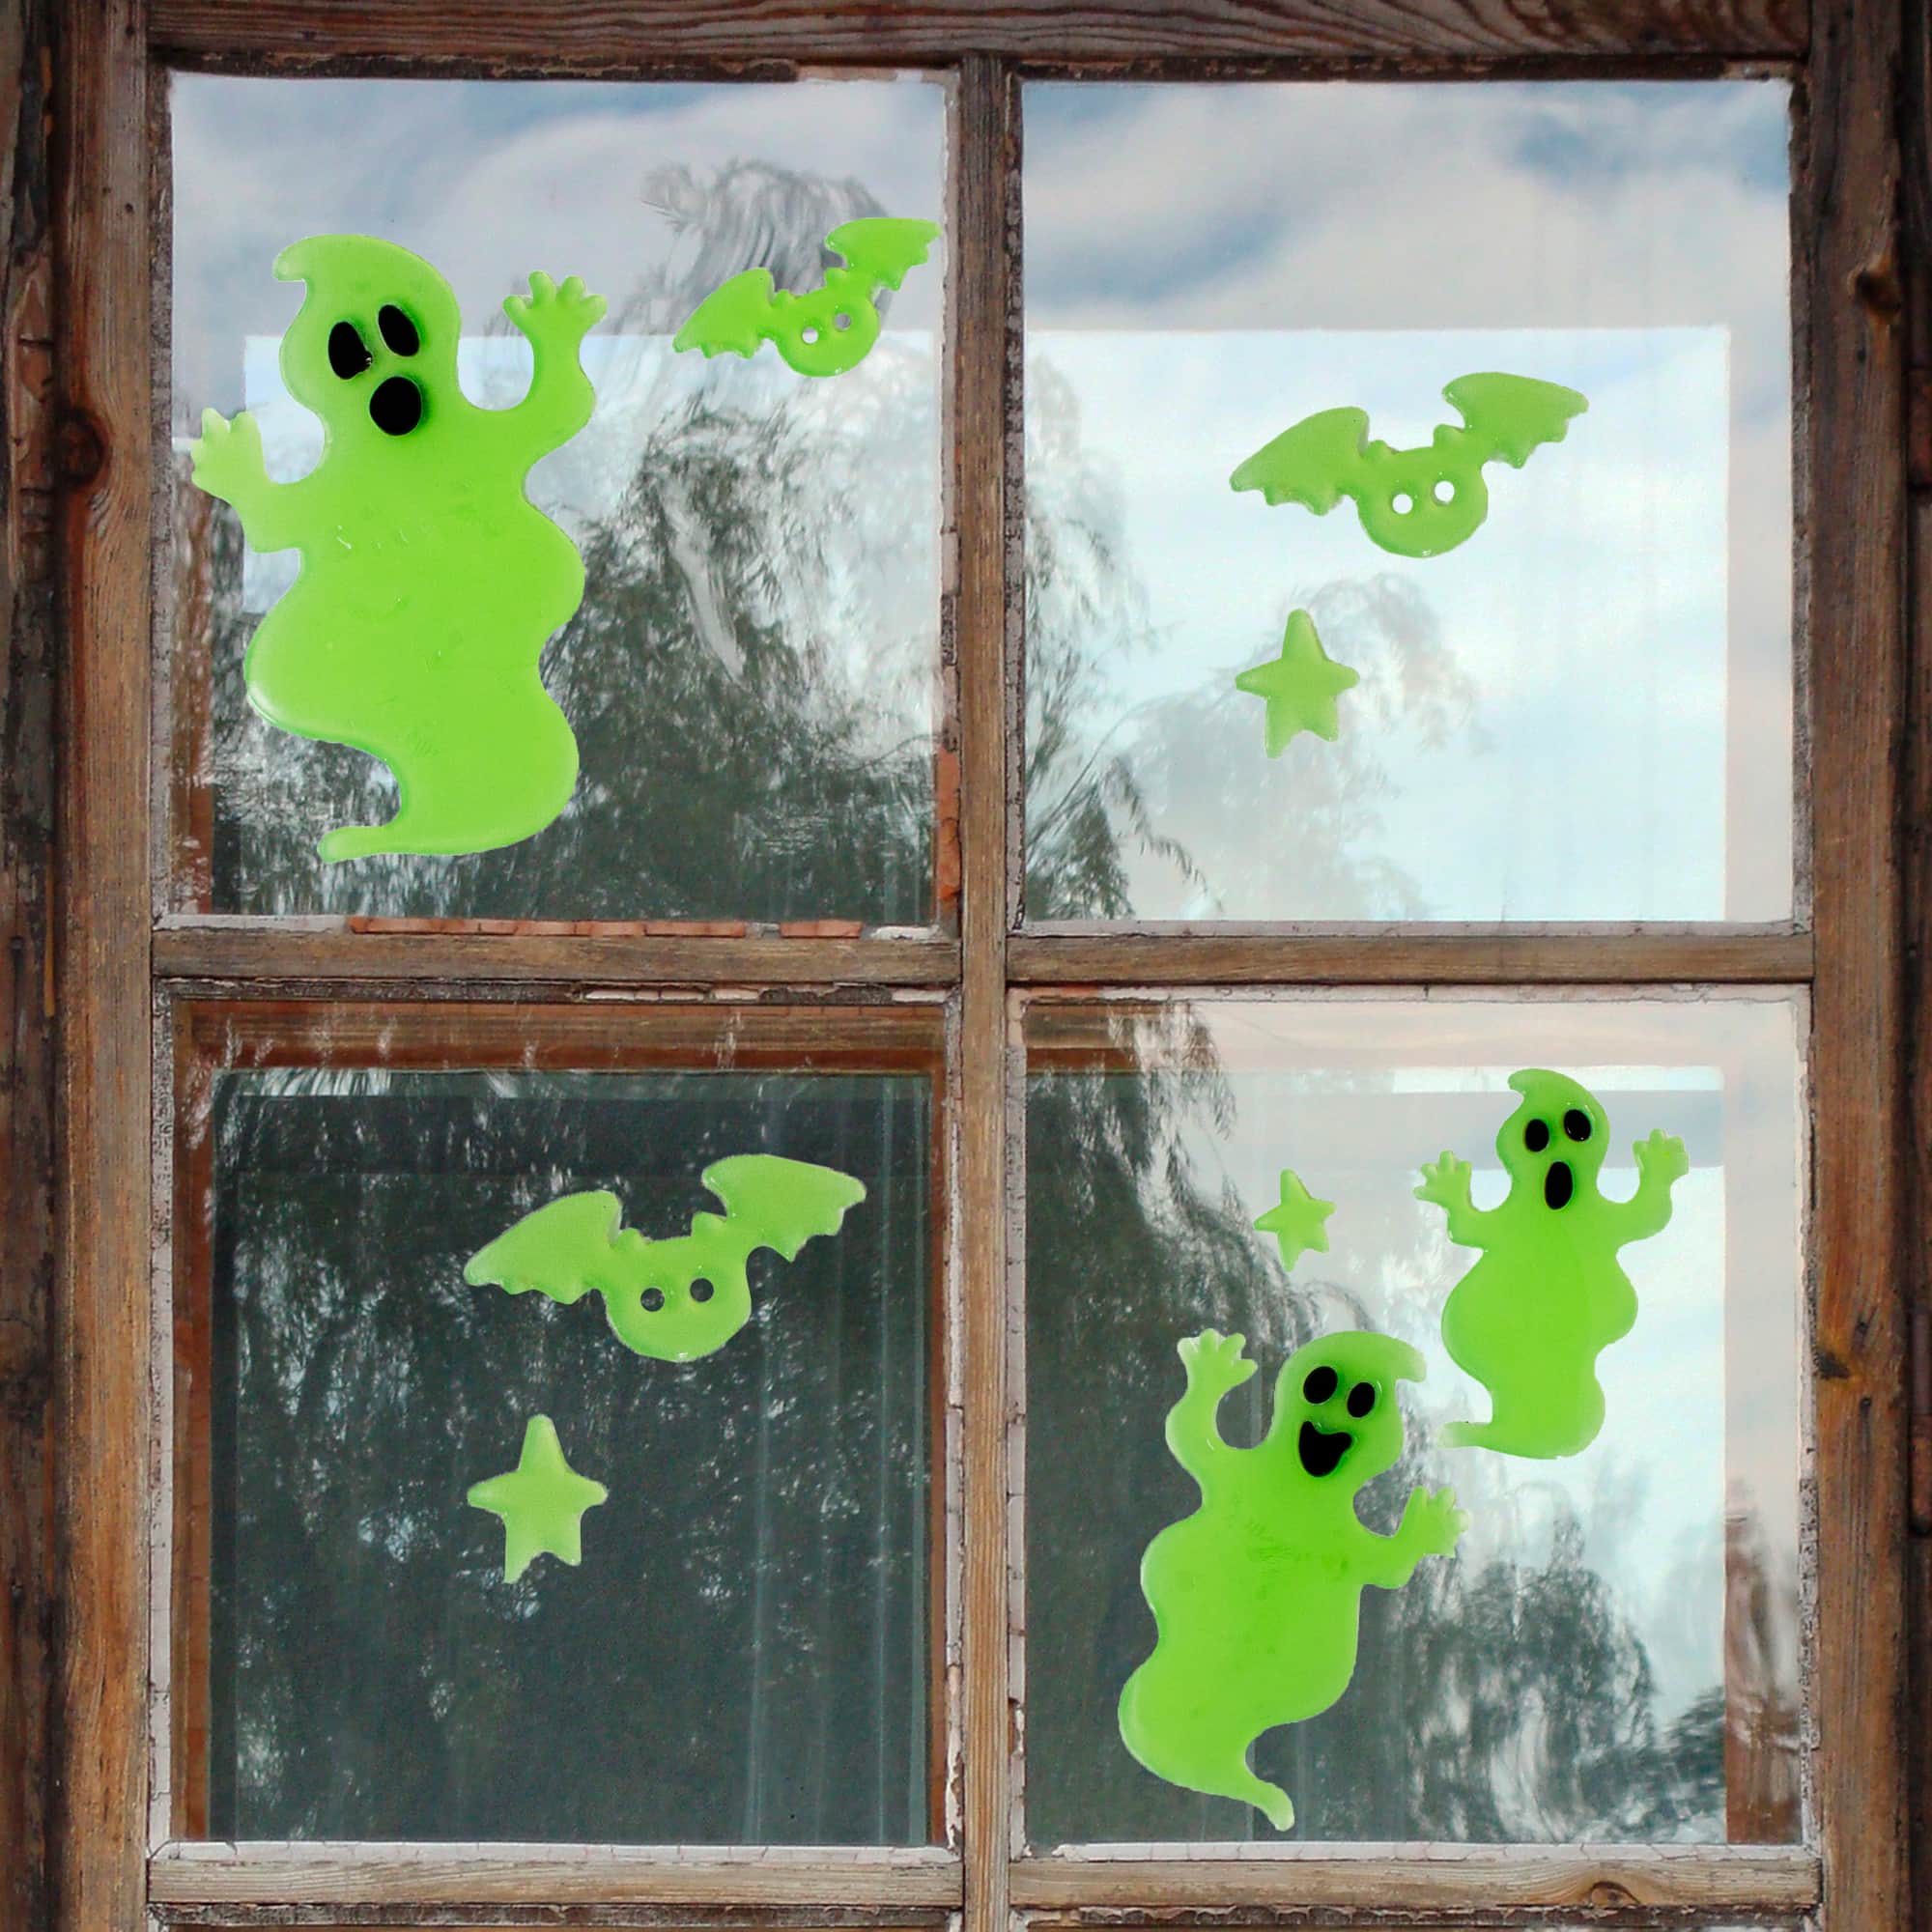 Details about   NEW Glow in the Dark HALLOWEEN Window Gel Sticker Clings 4 Large Ghouly Ghosts! 